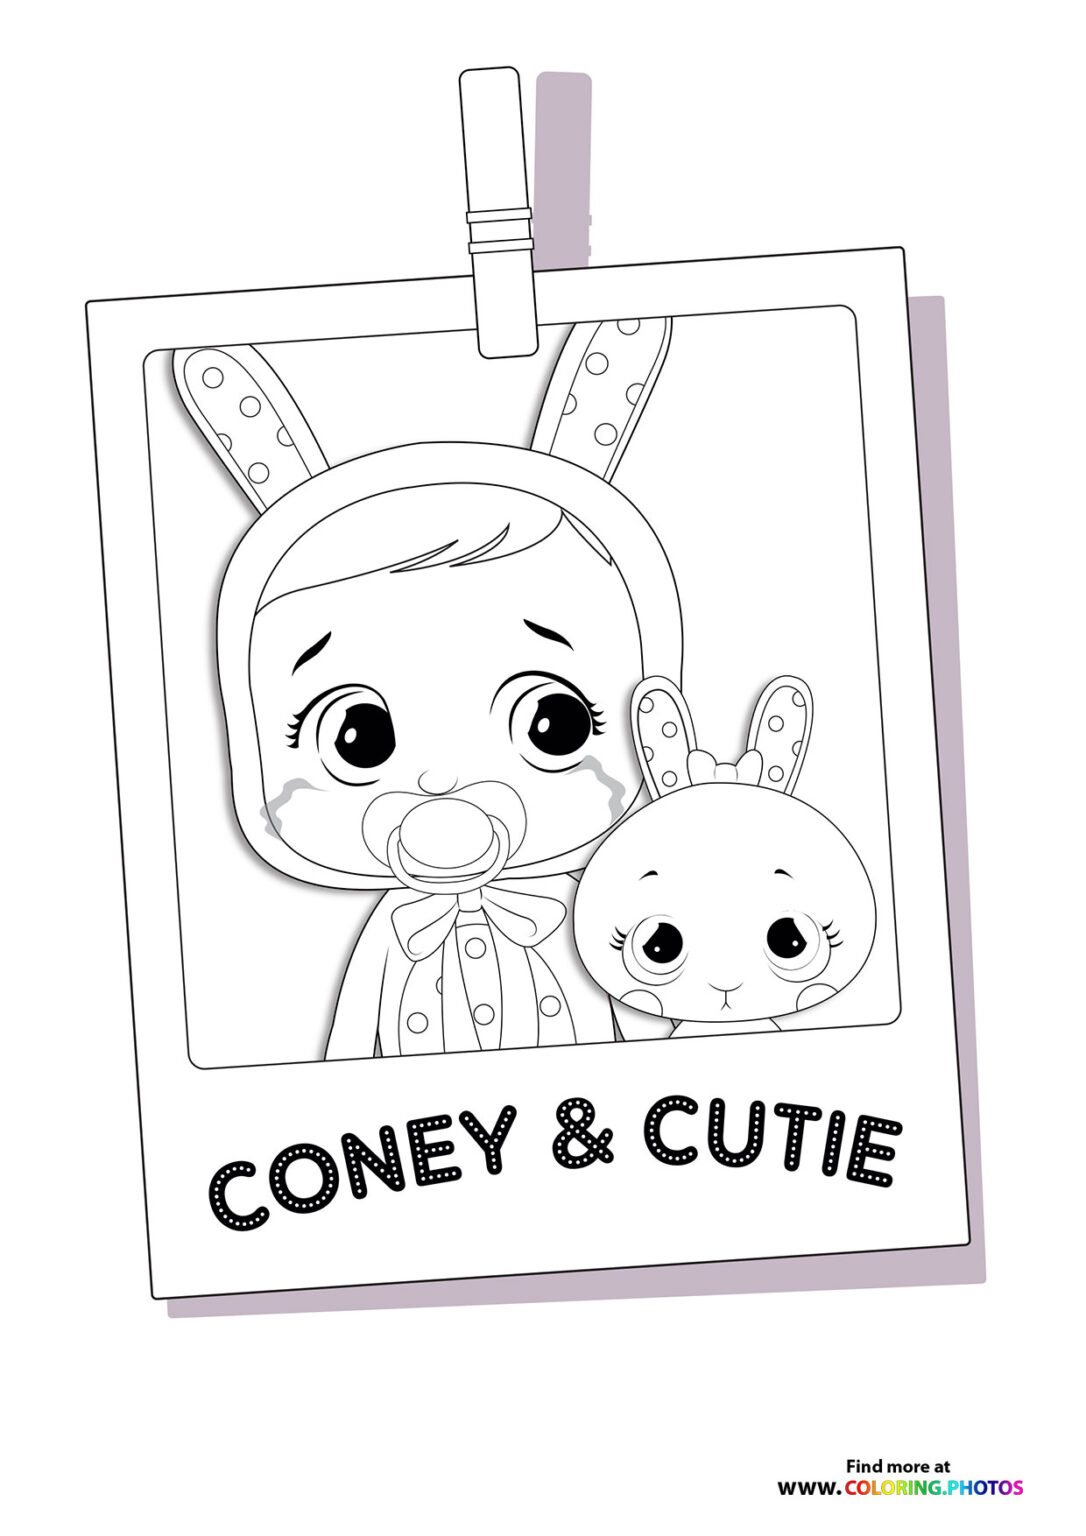 Cry Babies - Coloring Pages for kids | Free and easy print or download